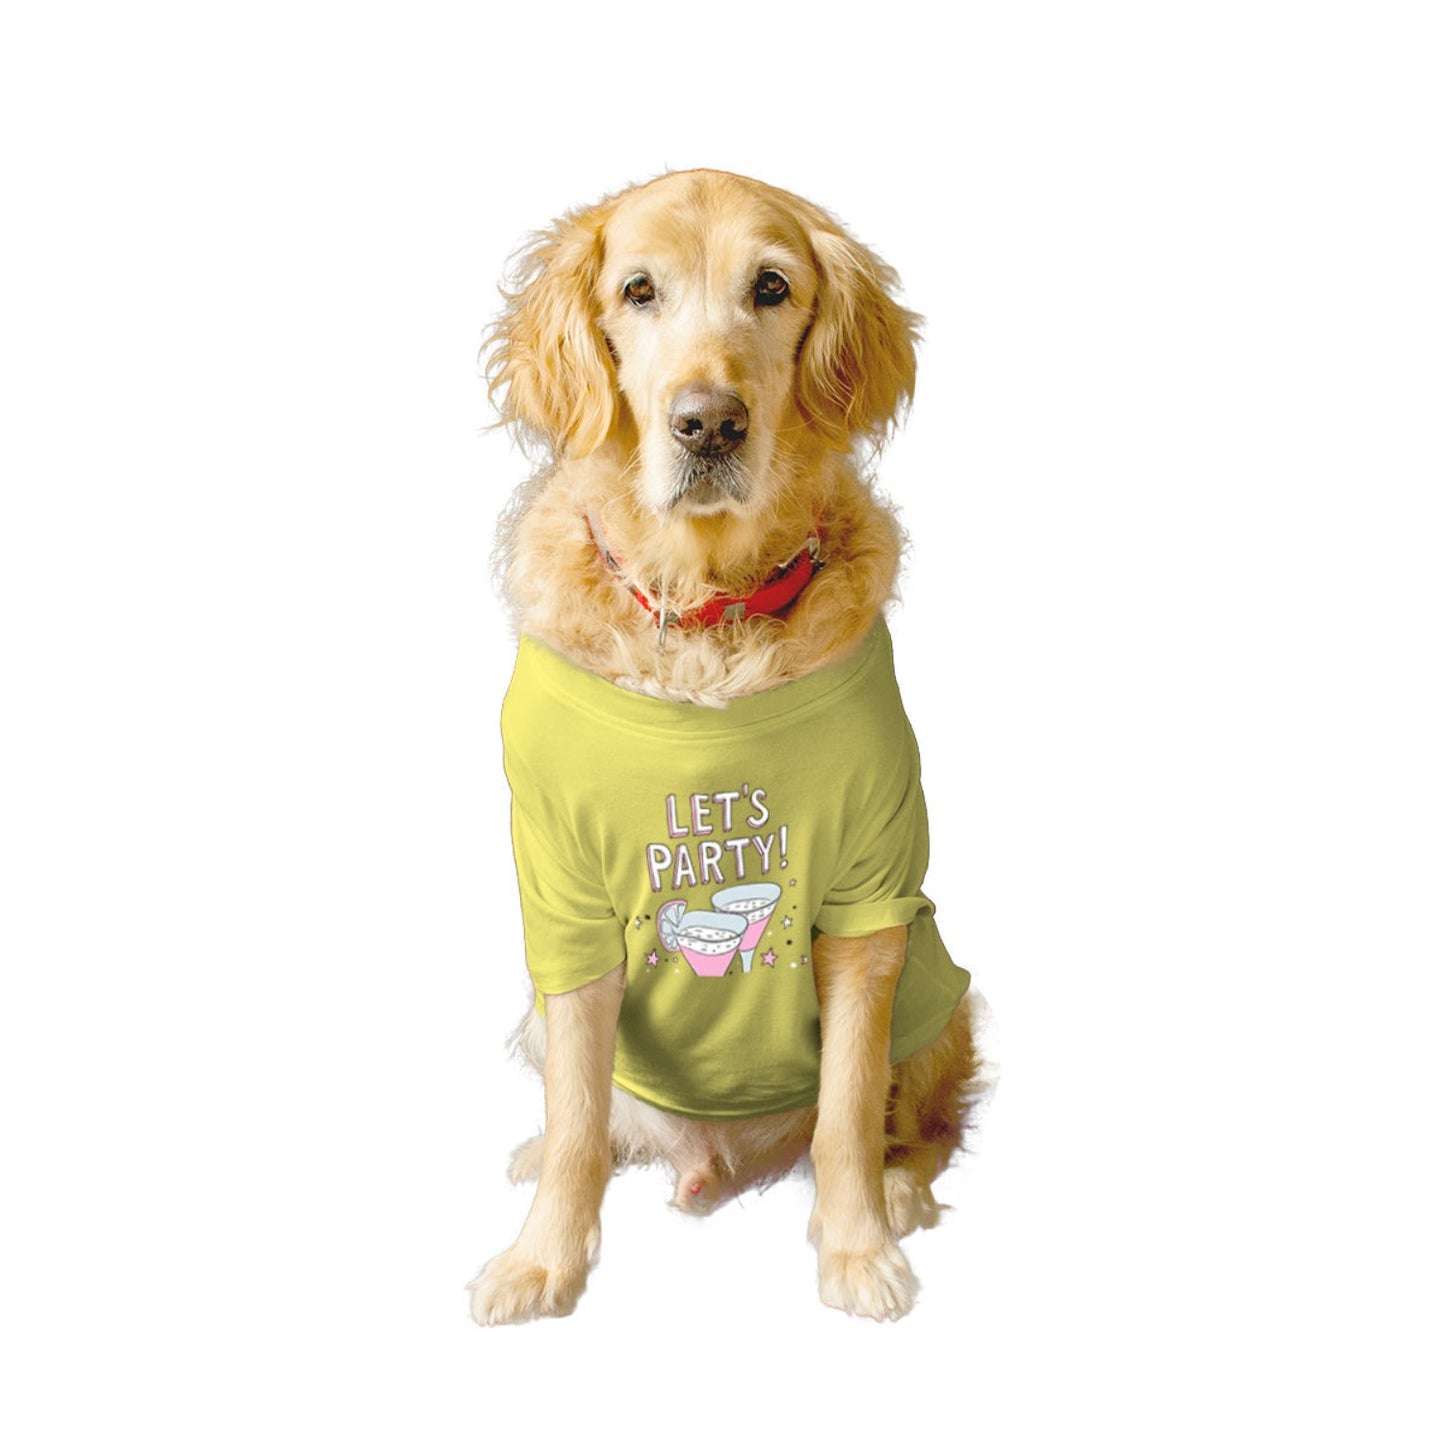 Ruse XX-Small (Chihuahuas, Papillons) / Lemon Tonic Ruse Basic Crew Neck "Let's Party" Printed Half Sleeves Dog Tee3